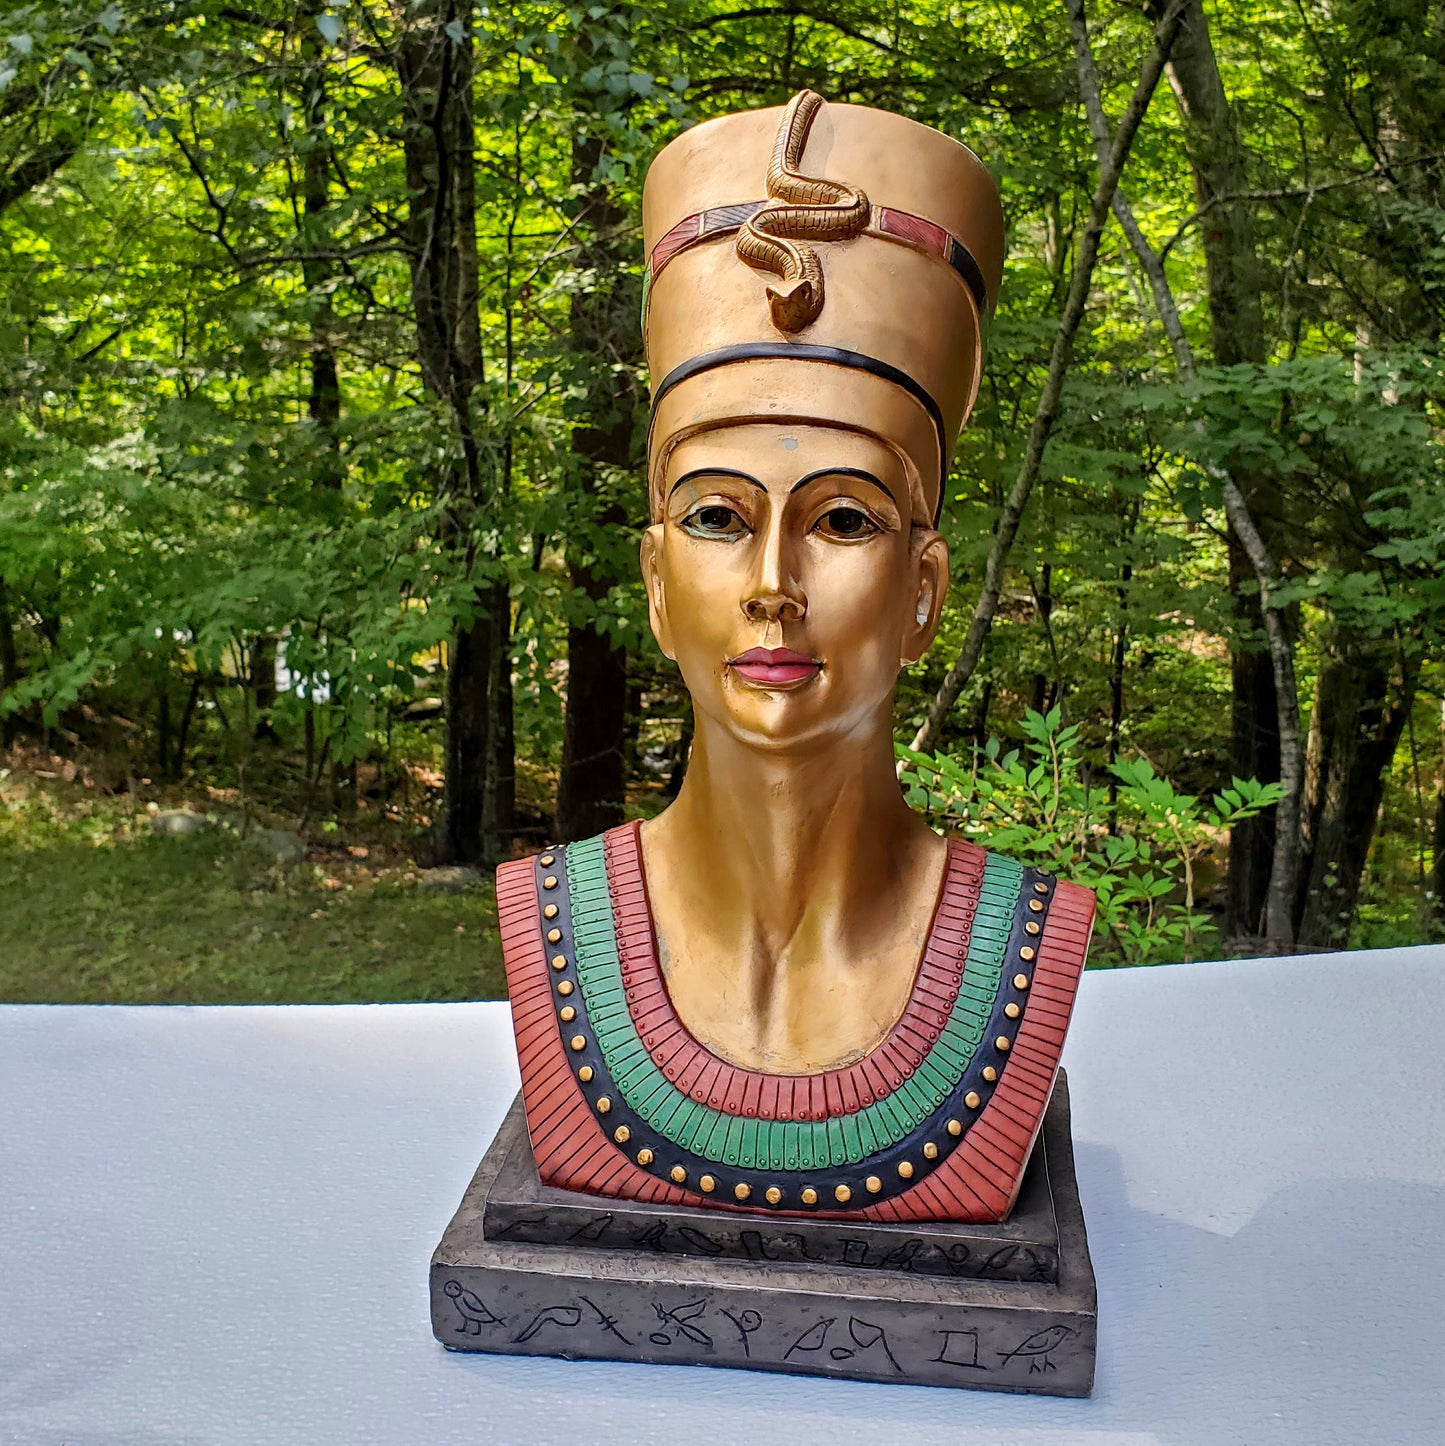 Vintage Large Queen Nefertiti Bust Sculpture Statue - 16" Tall (in fair condition)